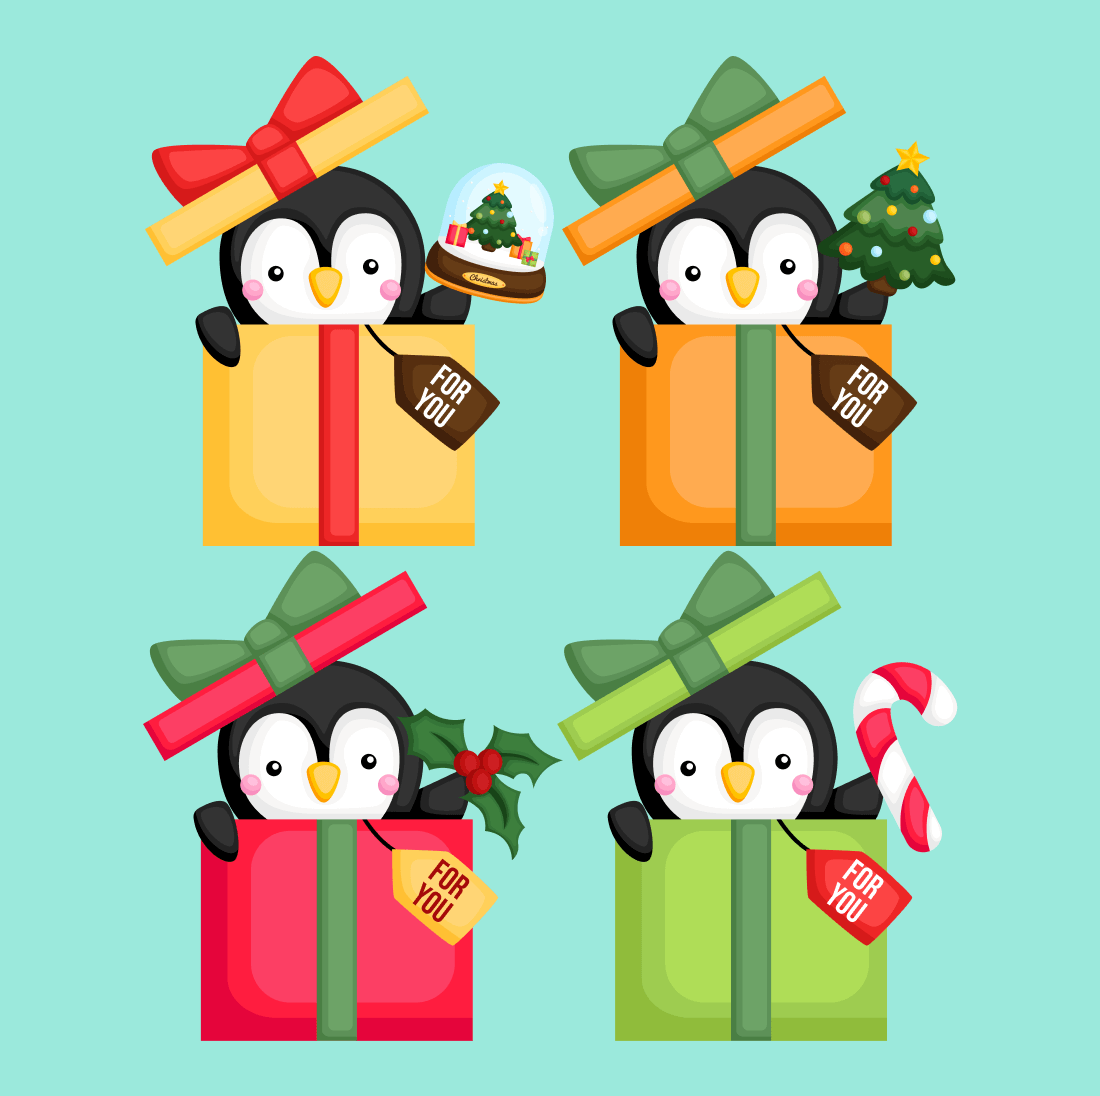 Penguin with a christmas present in a box.